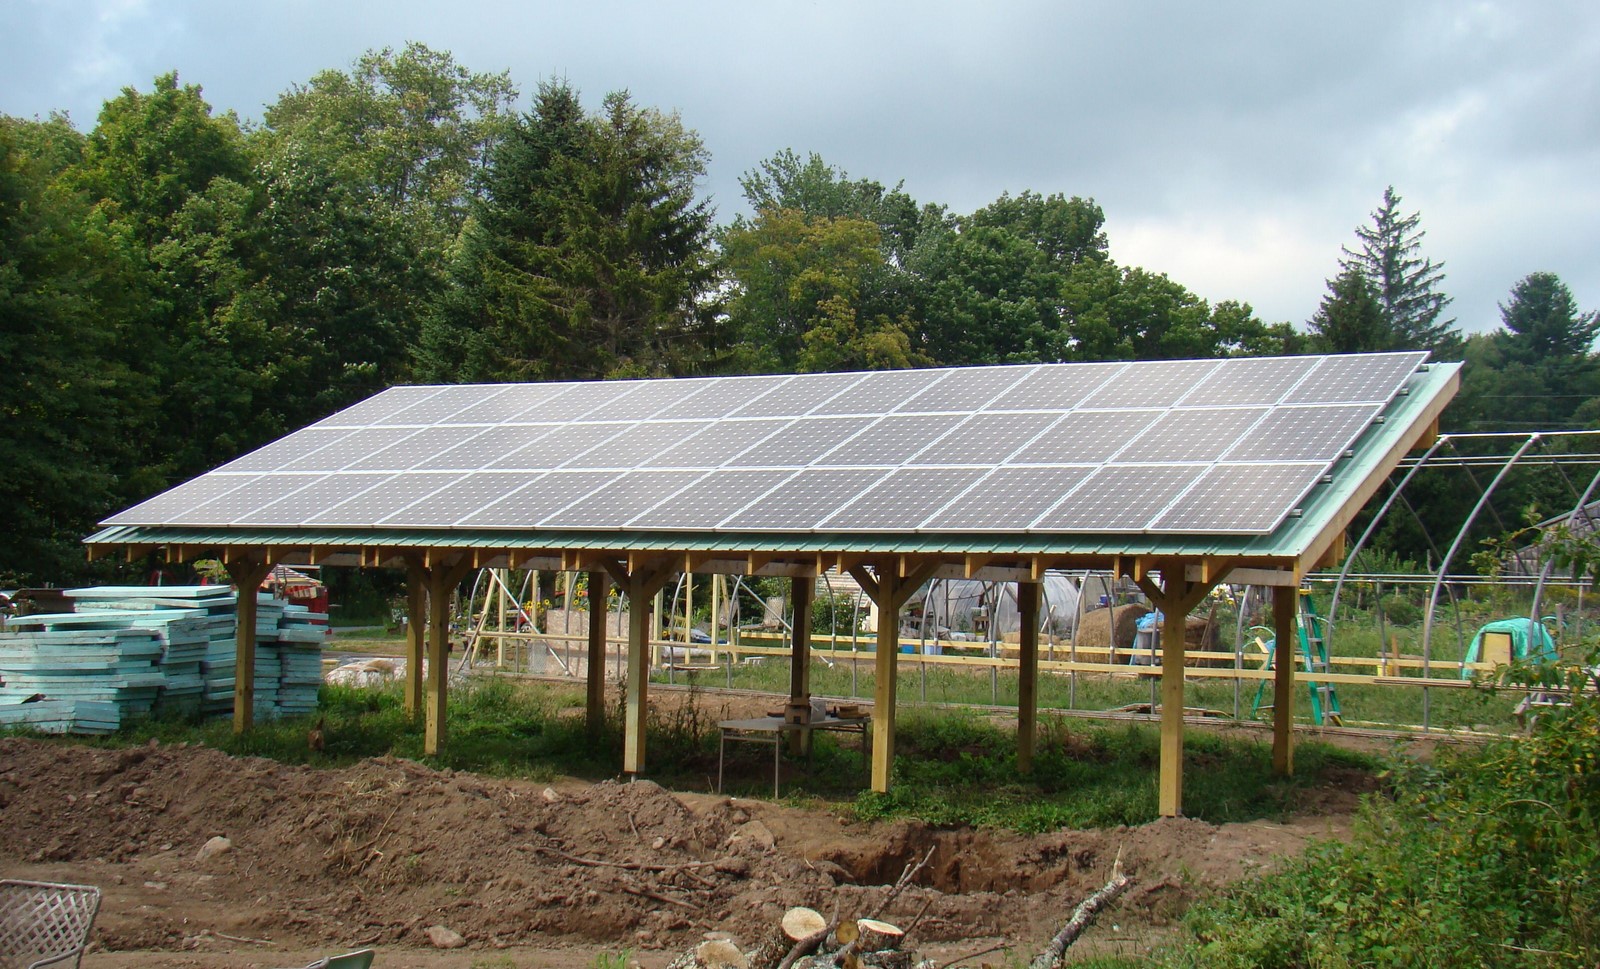 10 Pros and Cons of Ground-Mounted Solar Panels - The .ISO zone